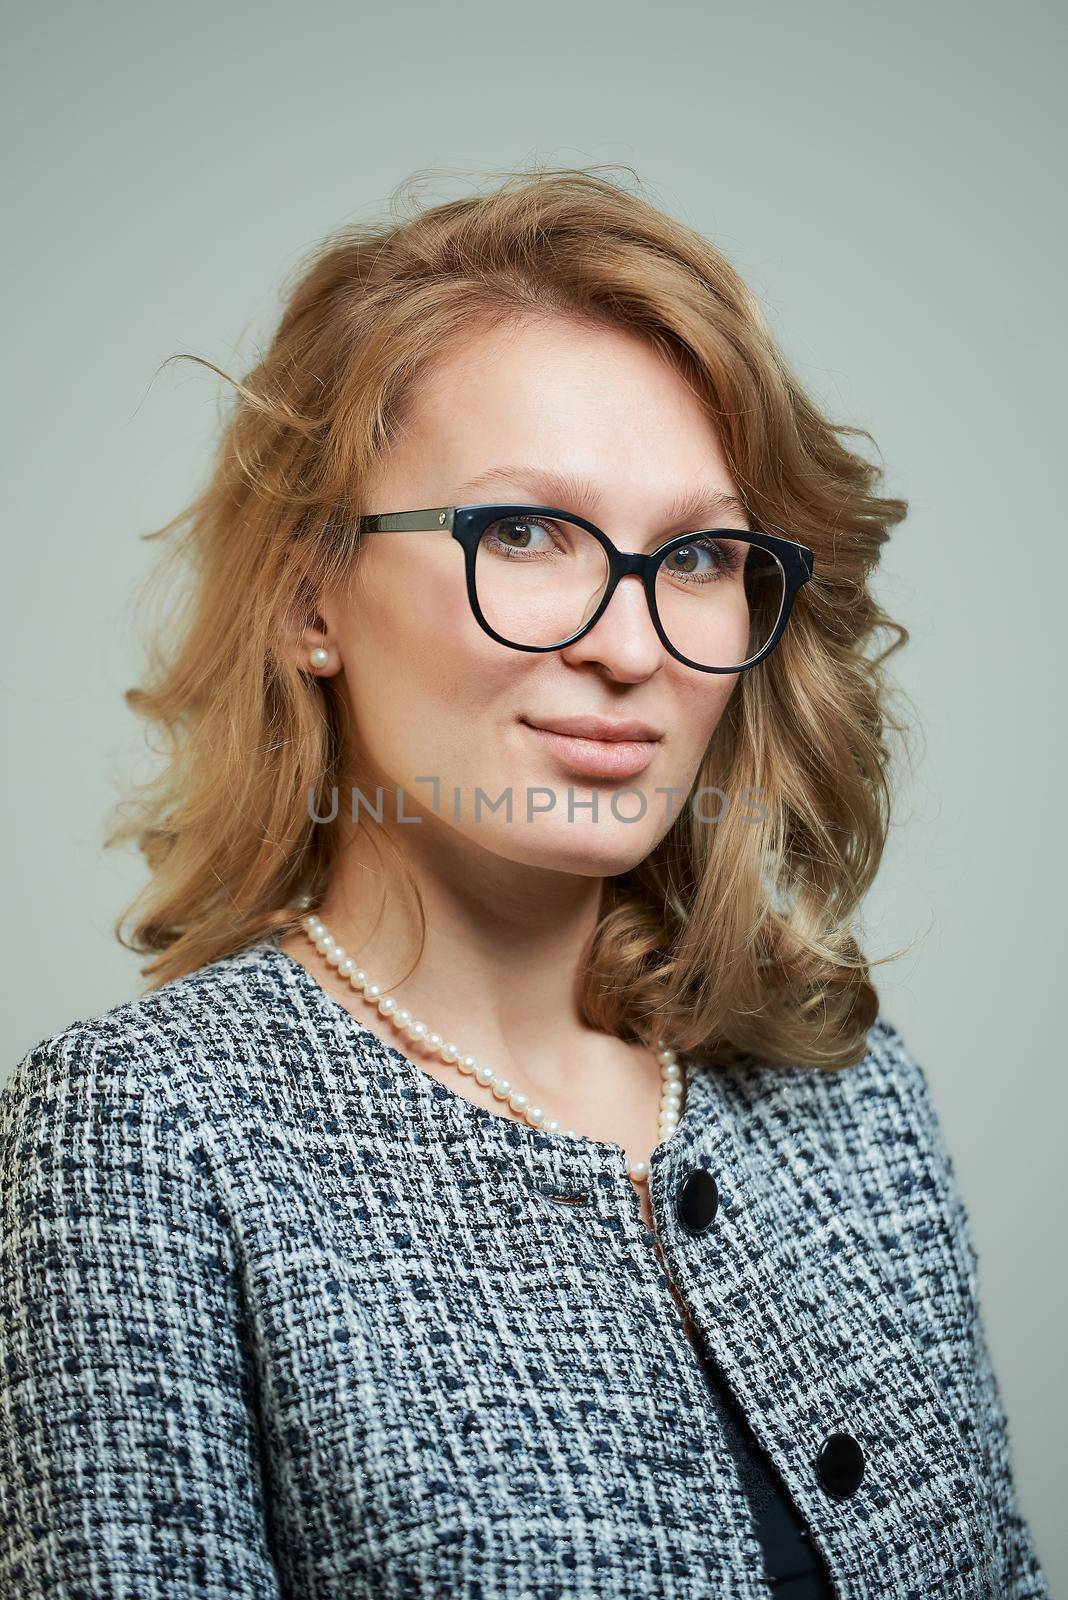 A young woman in glasses dressed in a grey skirt suit with a black shirt. by RomanJRoyce